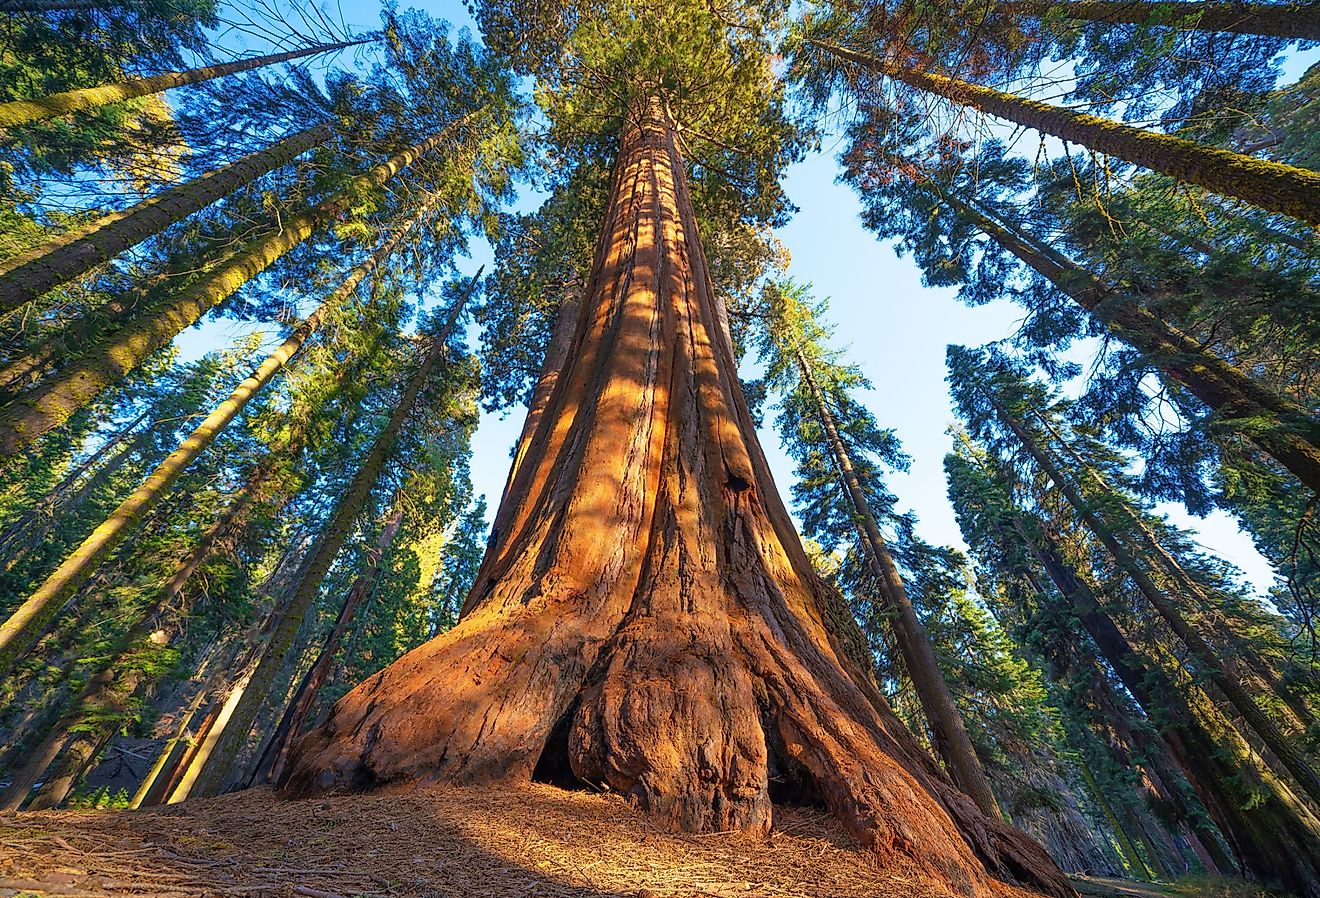 View from below of large tree in Sequoia National Park, California.